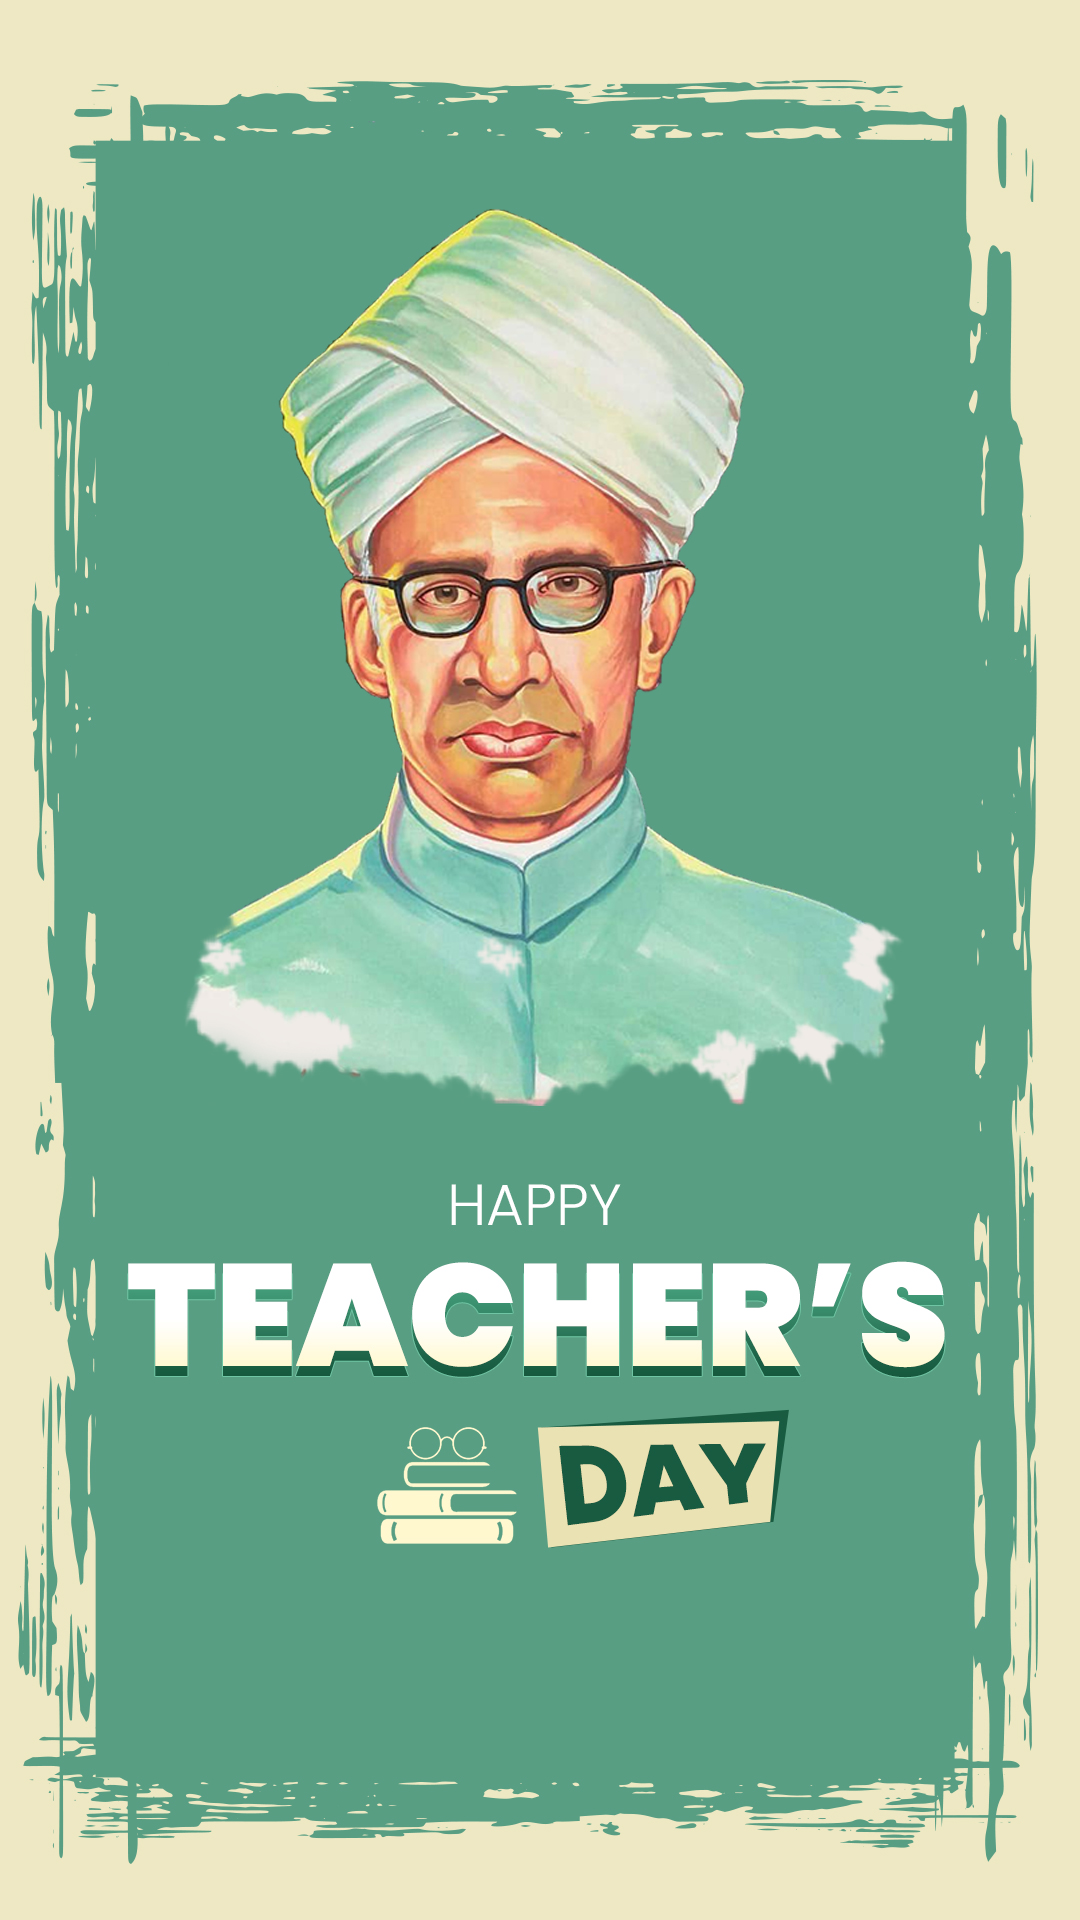 10 famous teachers in Indian history